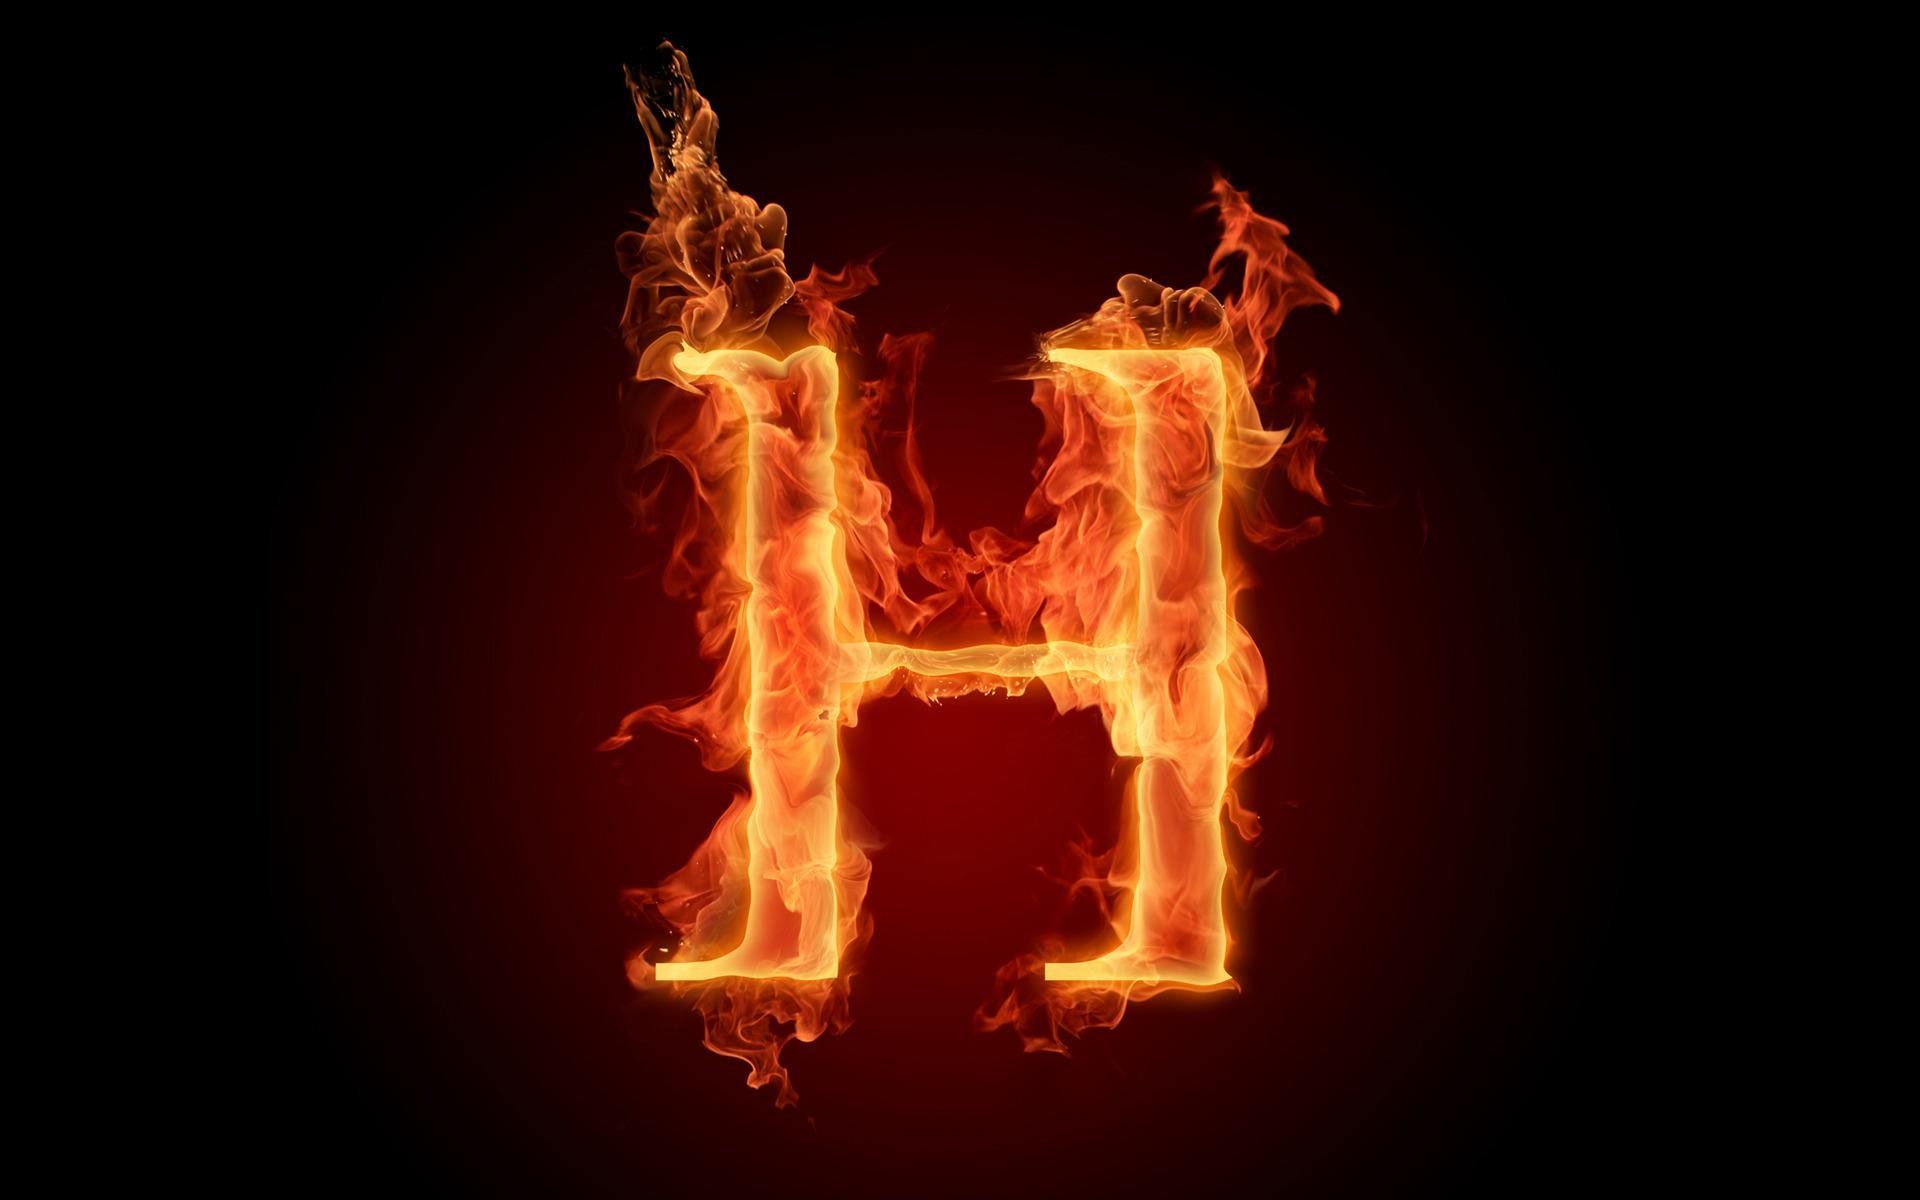 the fiery english alphabet picture h, 1920x1200 Wallpaper